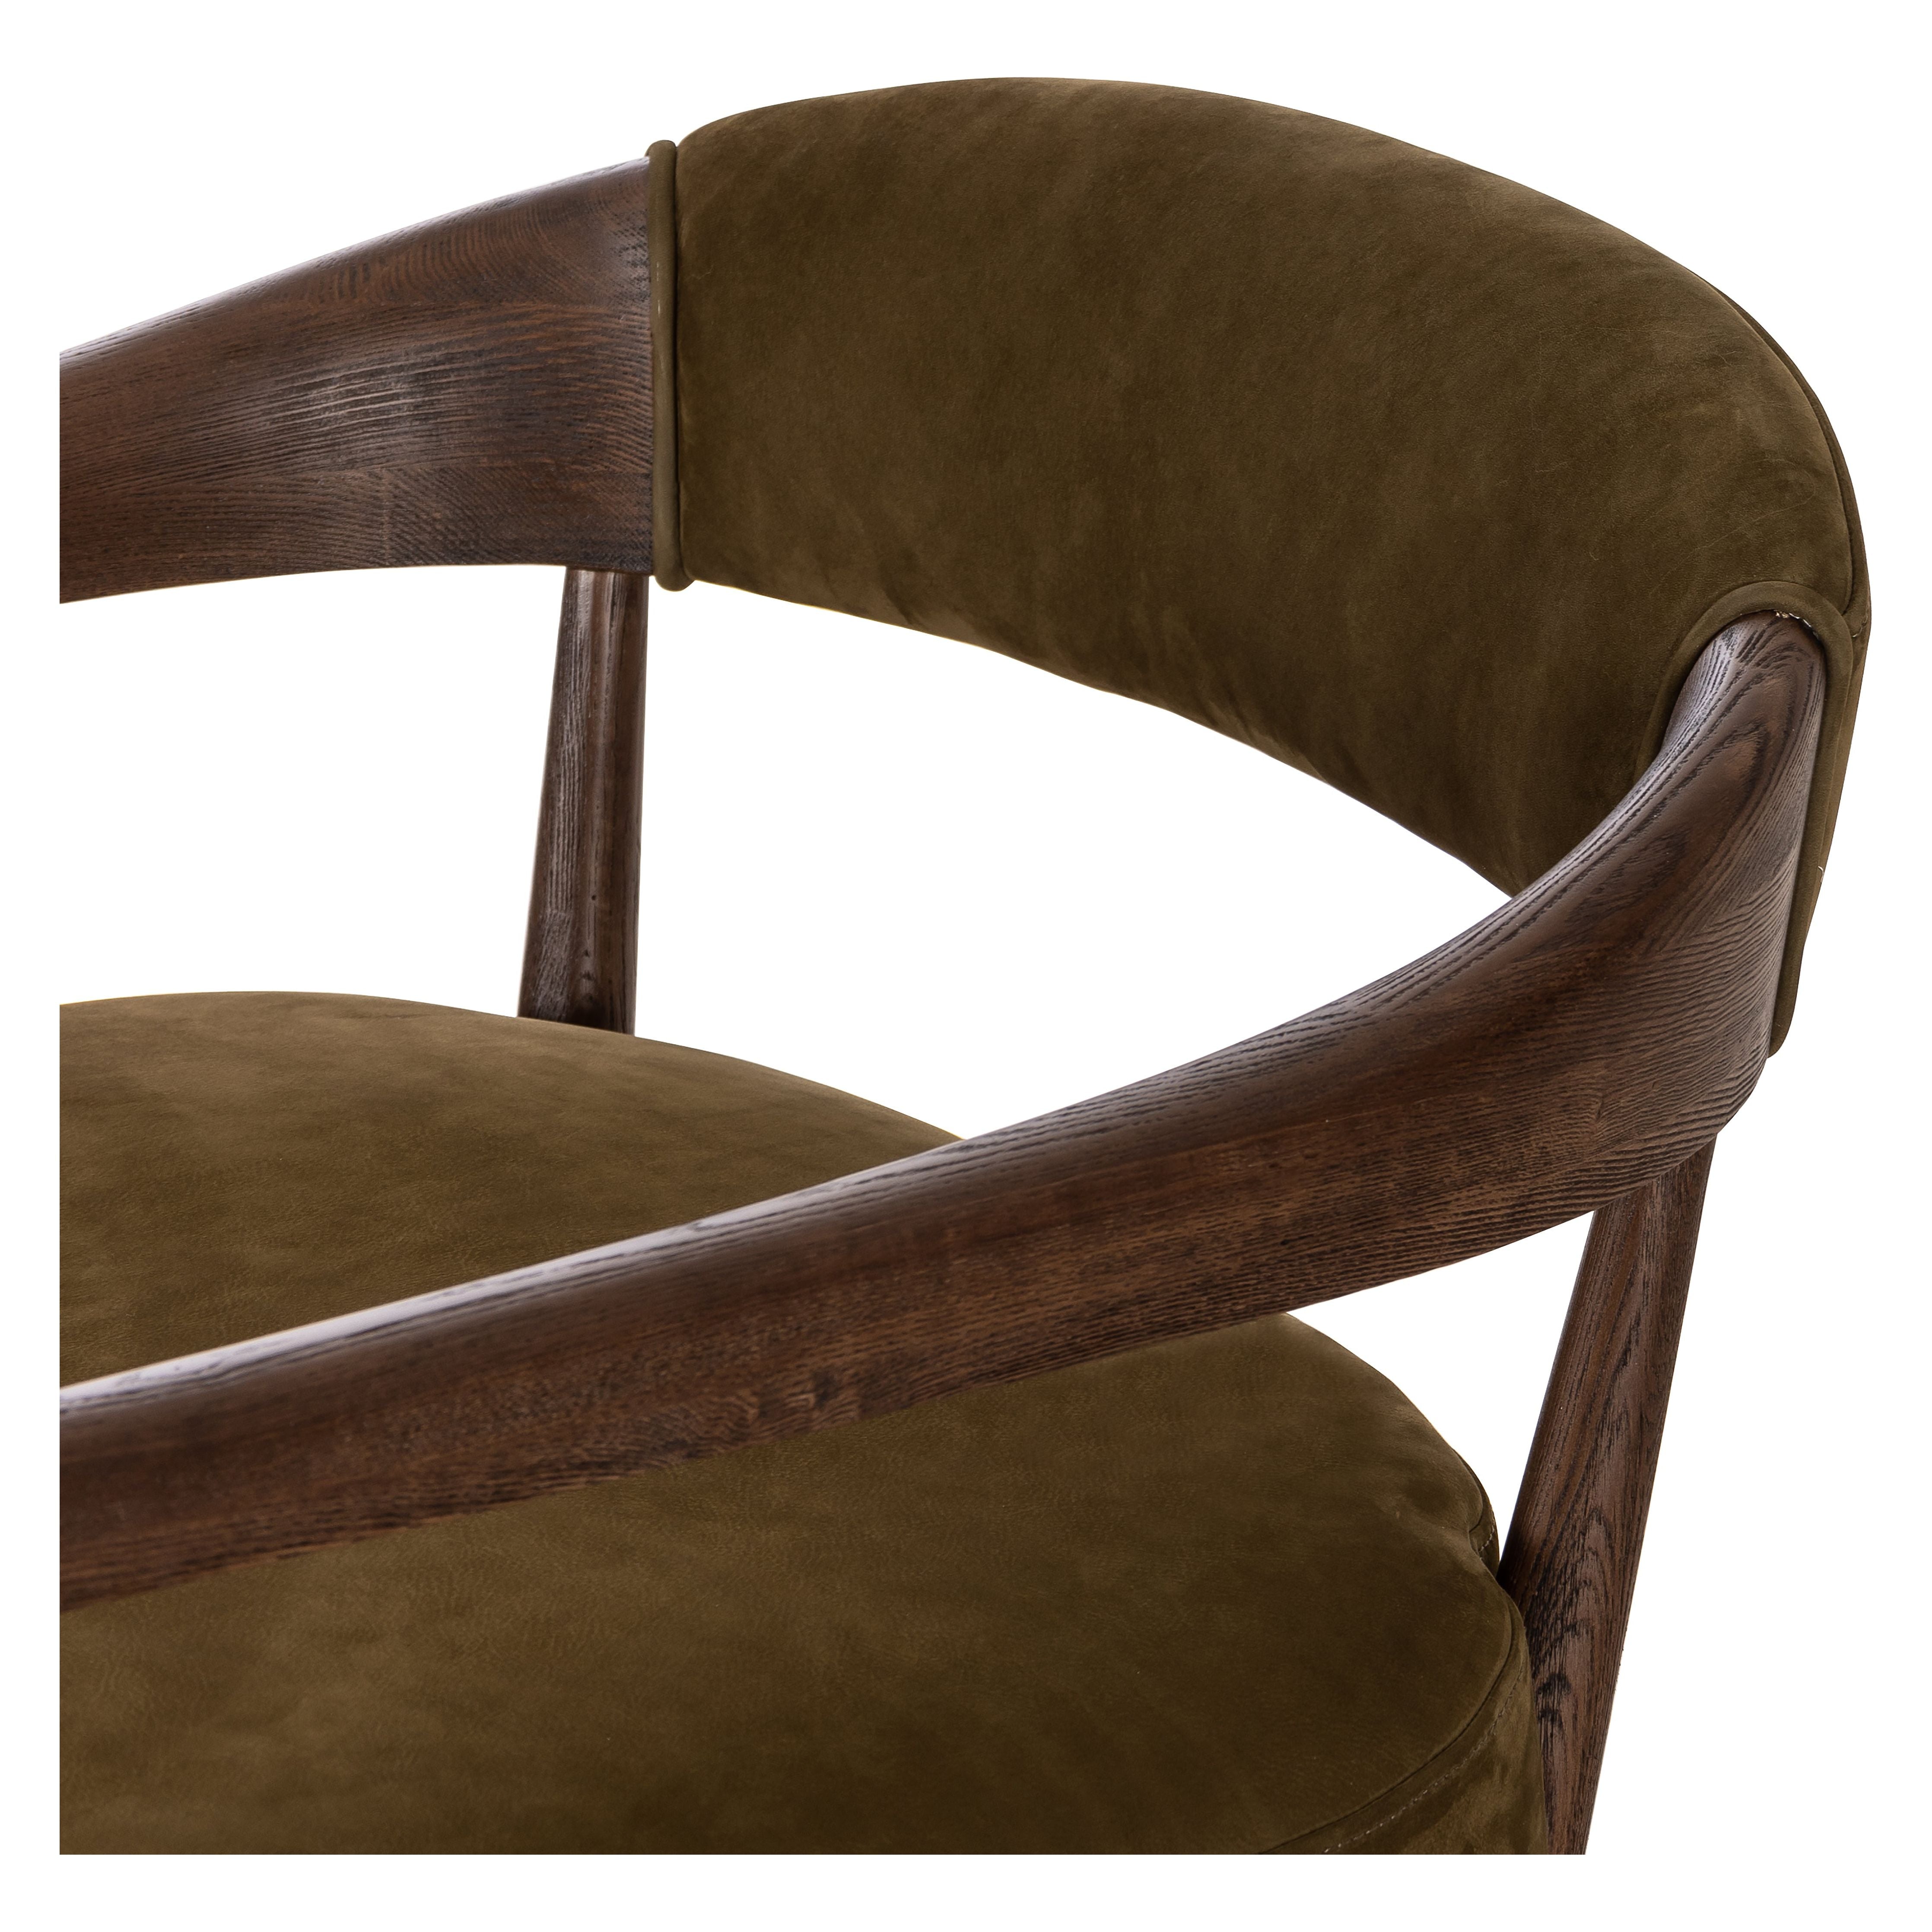 Safari styling is brought to modern speed on this vintage-inspired chair. Its solid wood frame features a webbed seating structure that brings a sink-in feel to the entire piece. The upholstered back, strap details and loose cushion are finished in a rich Italian-made leather with a soft, buttery feel and subtle highs and lows throughout the hide that bring movement to the entire piece. Amethyst Home provides interior design, new construction, custom furniture, and area rugs in the Washington metro area.